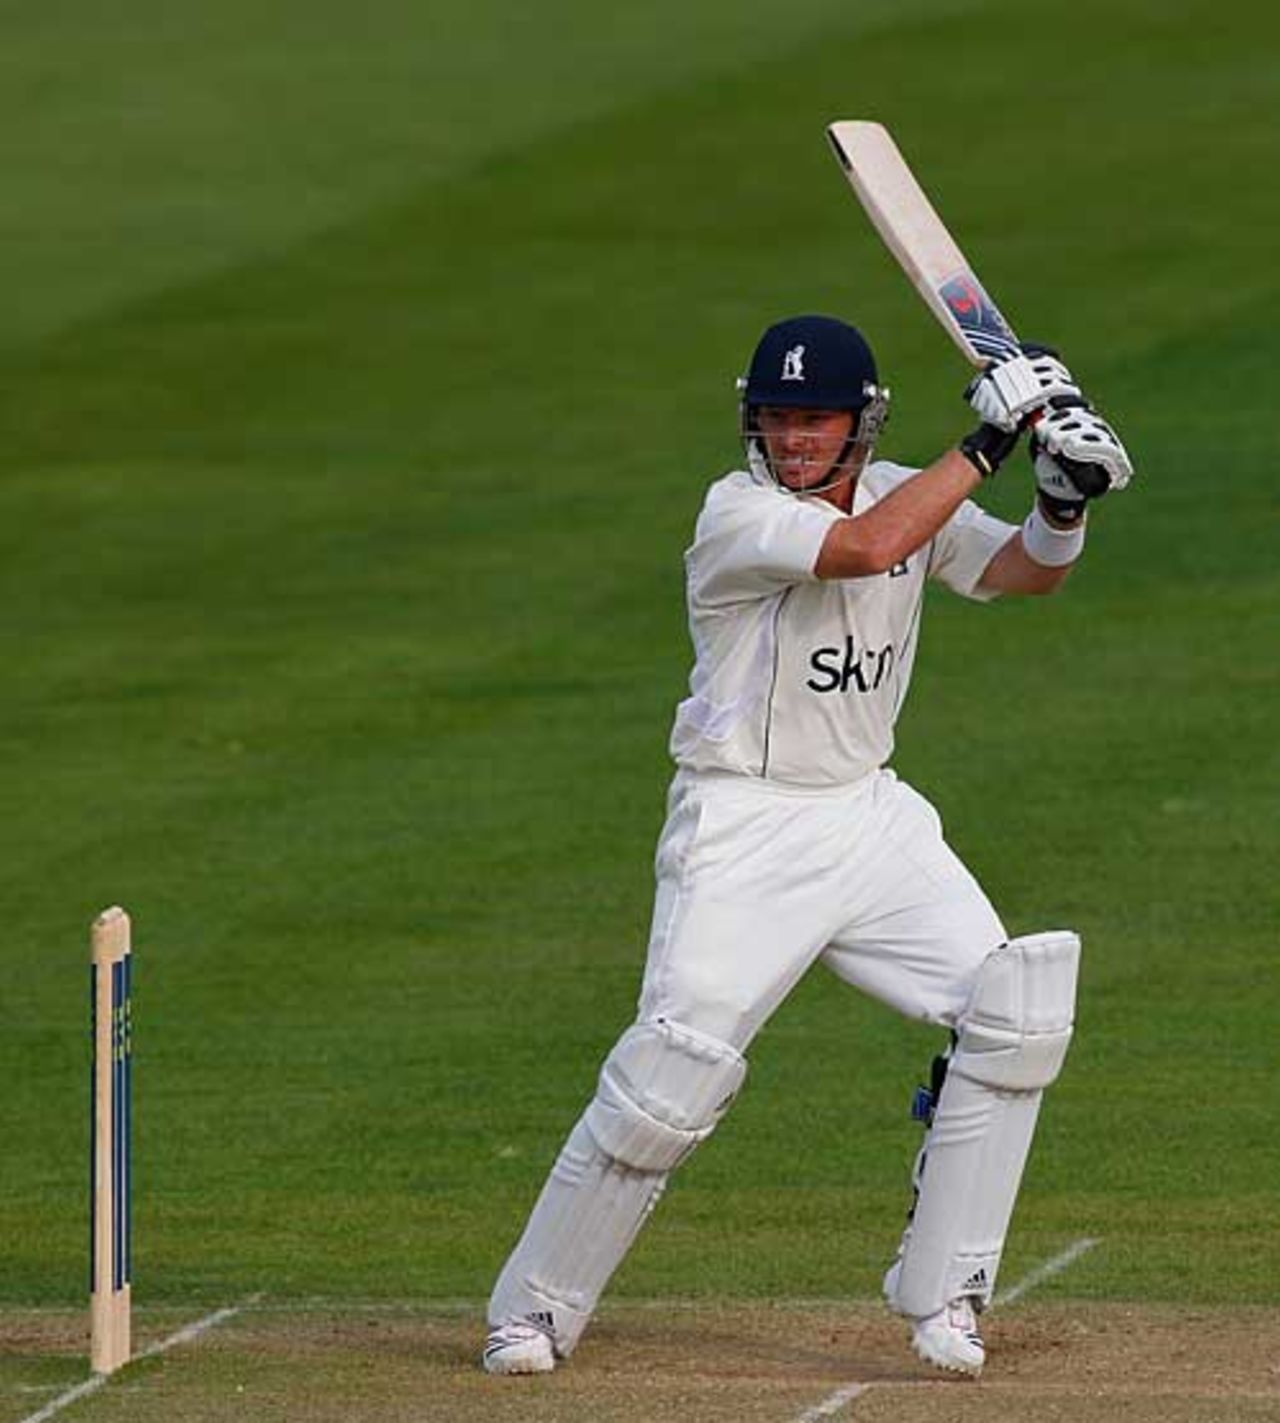 Ian Bell helped Warwickshire back into the lead against Yorkshire, Warwickshire v Yorkshire, County Championship Division One, Edgbaston, April 10, 2010